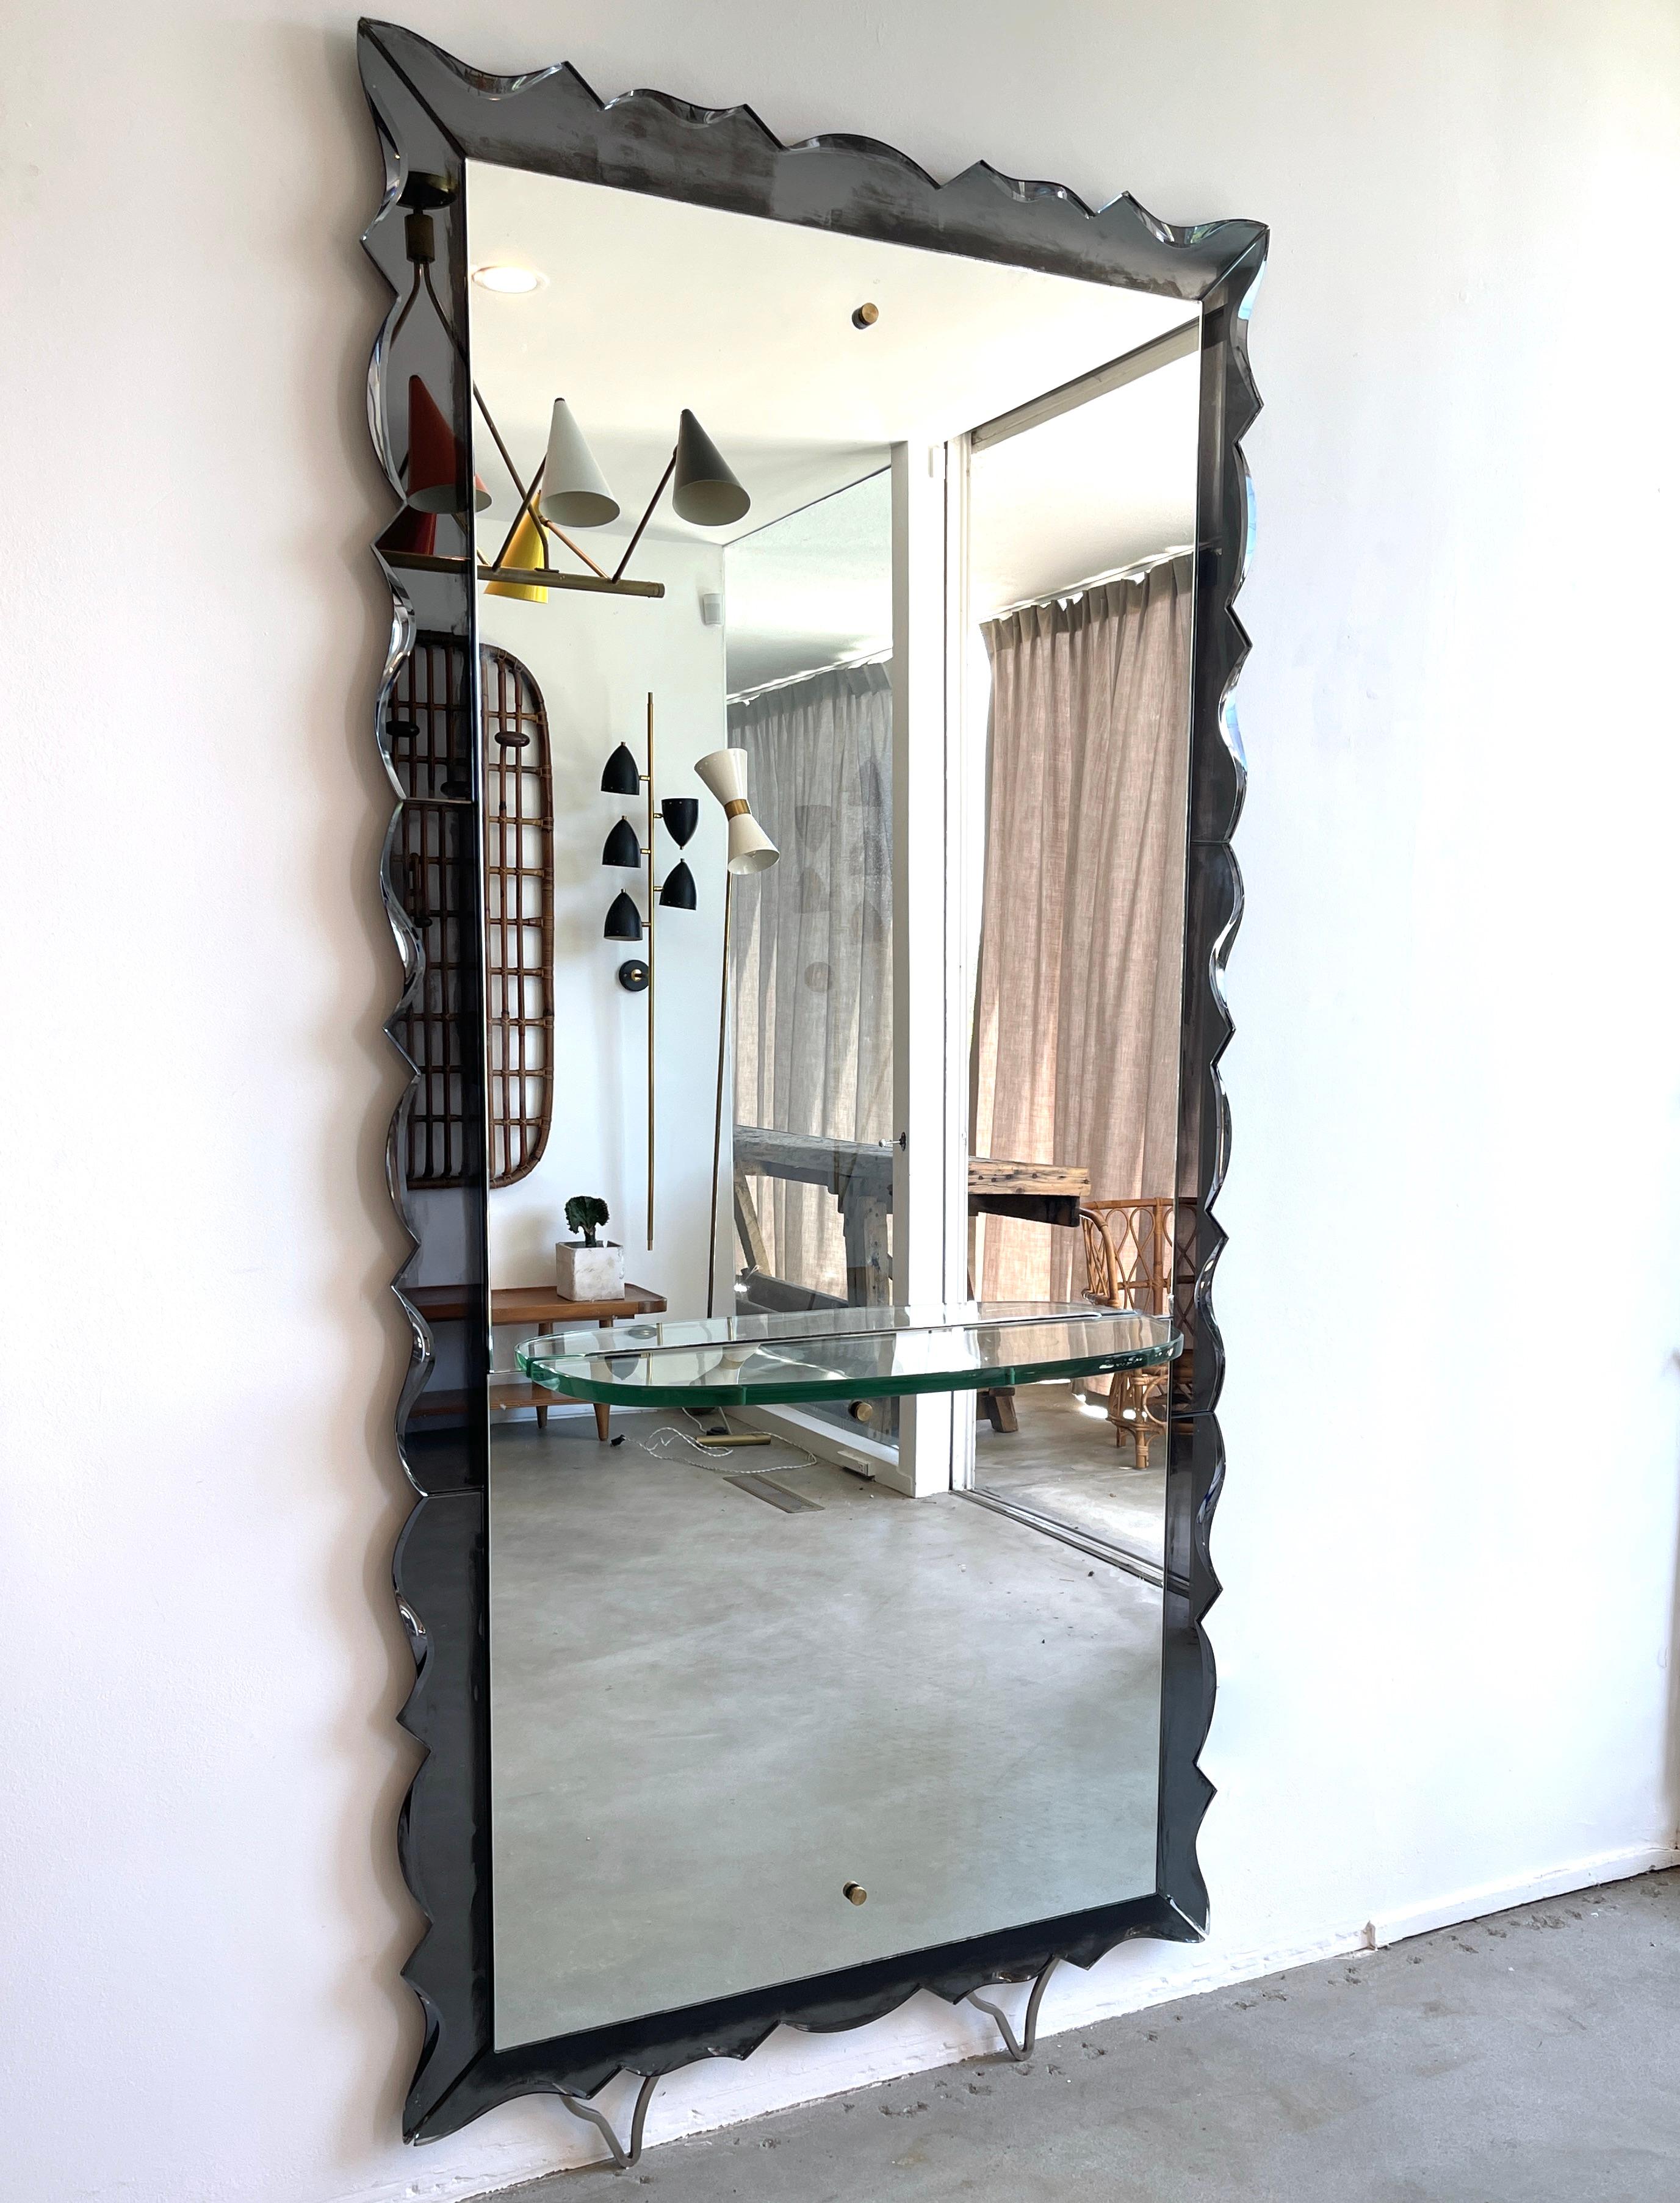 Incredible Cristal Arte leaning wall mirror with scalloped edges
Slate Grey colored mirror on floating legs with glass shelf
Impressive in size.